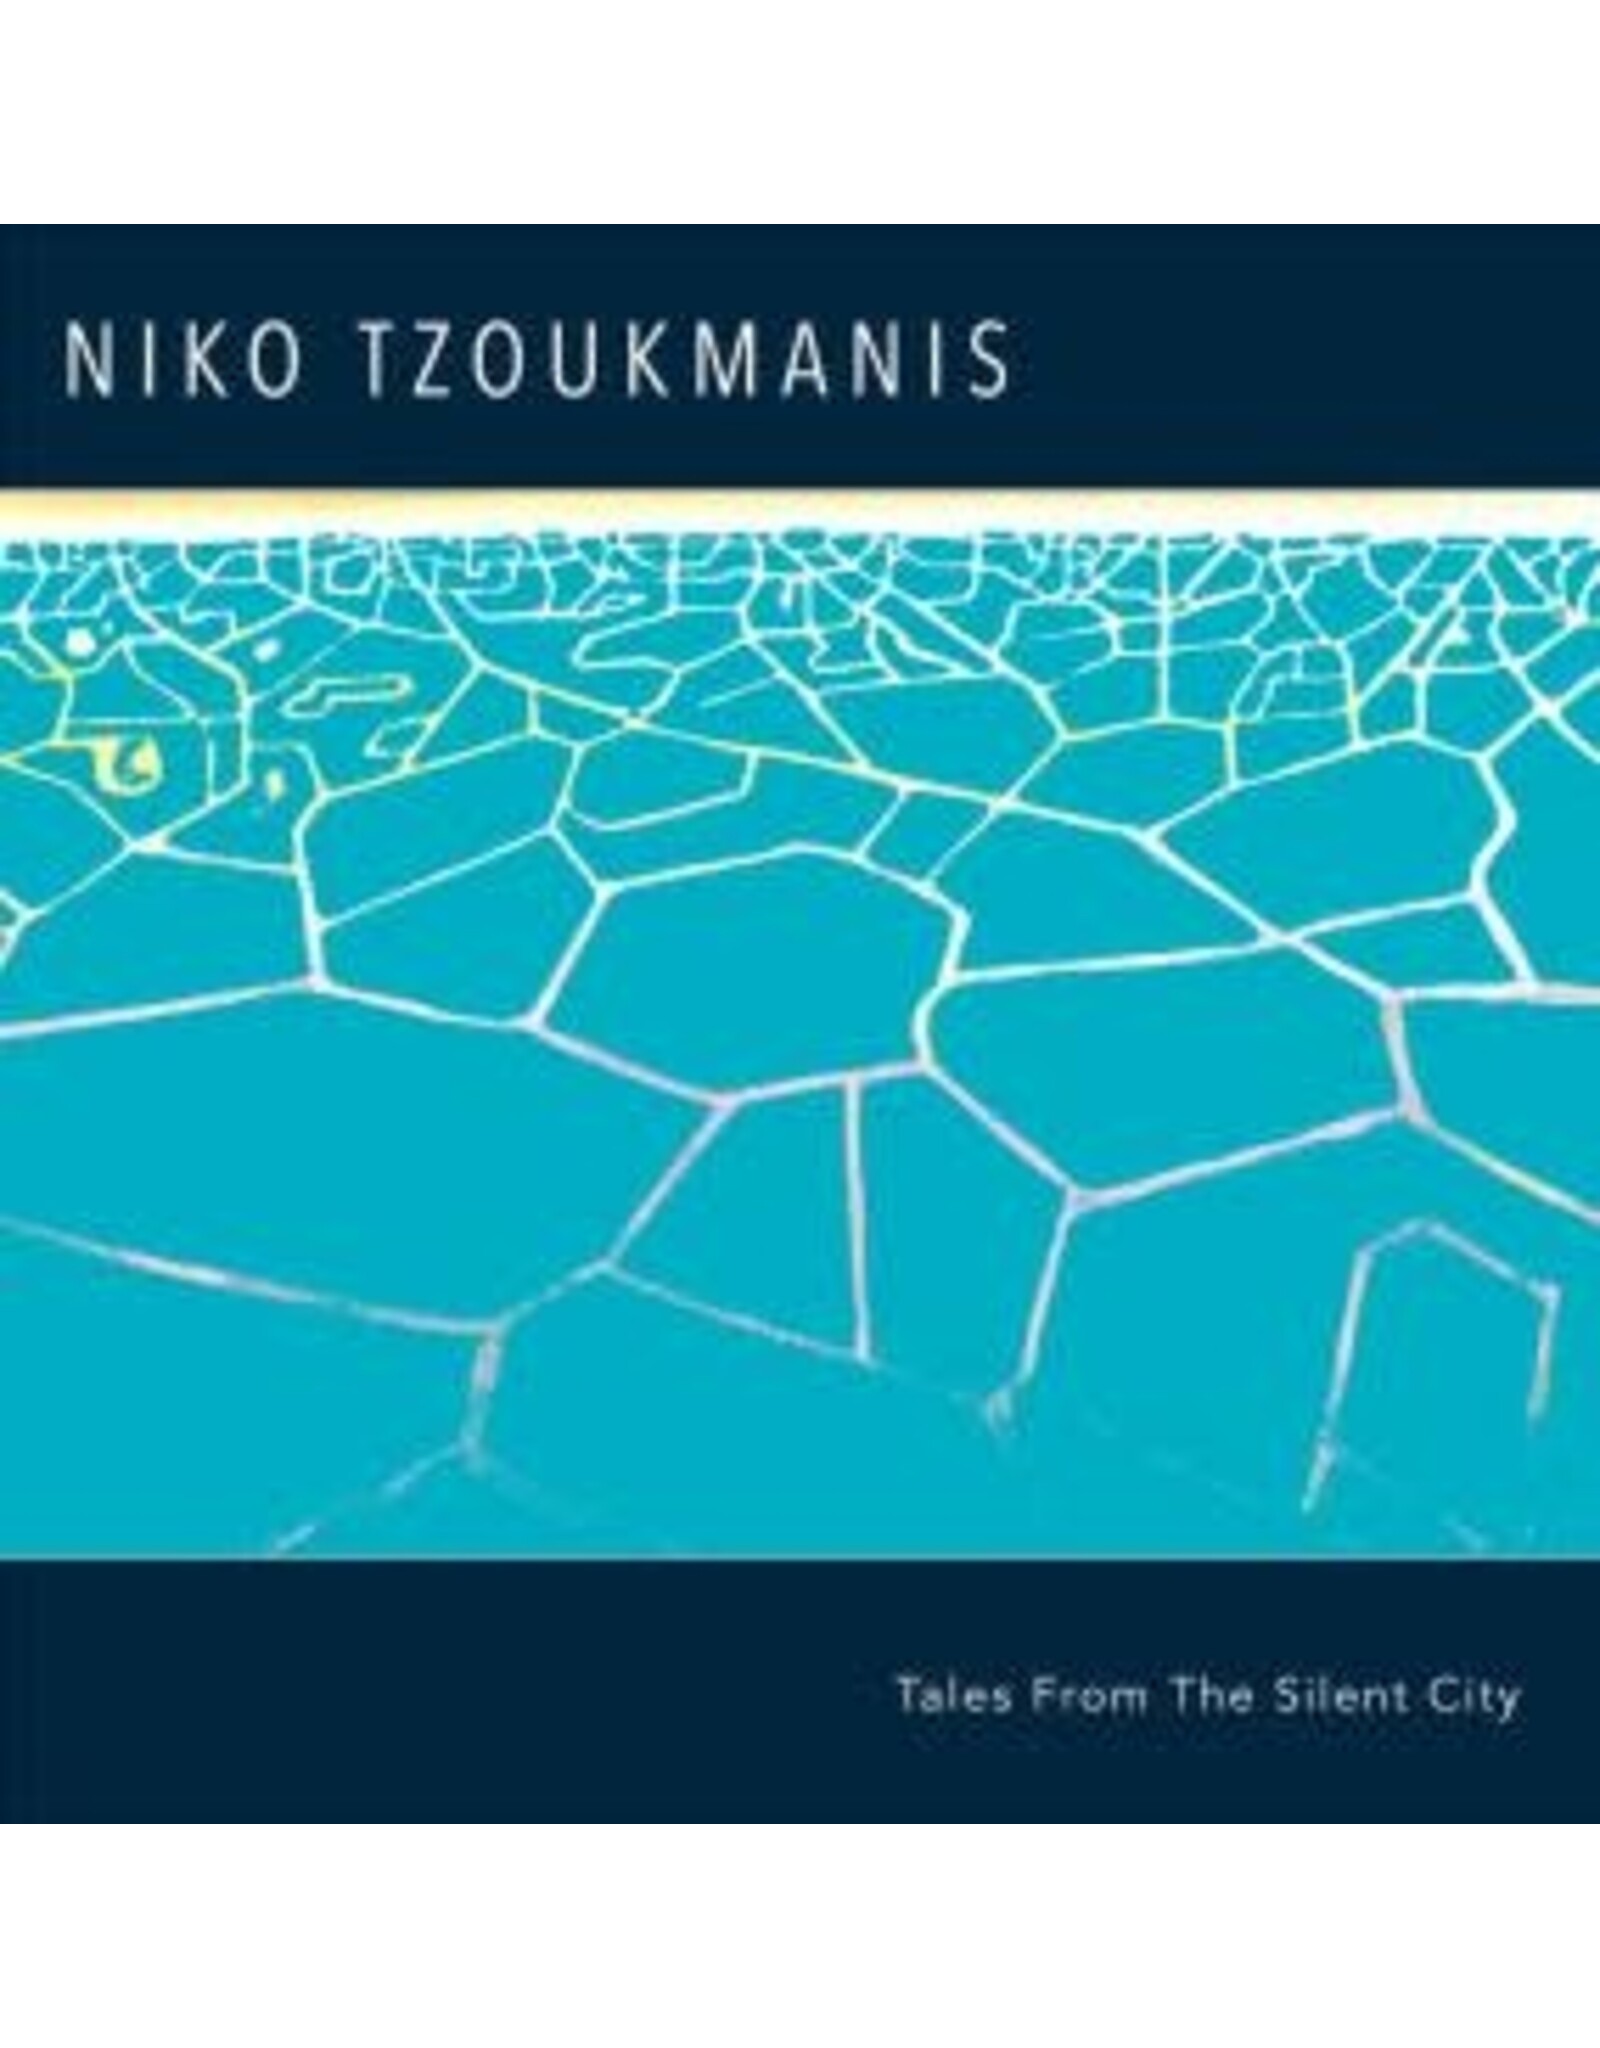 Libreville Tzoukmanis, Niko: Tales From the Silent City LP